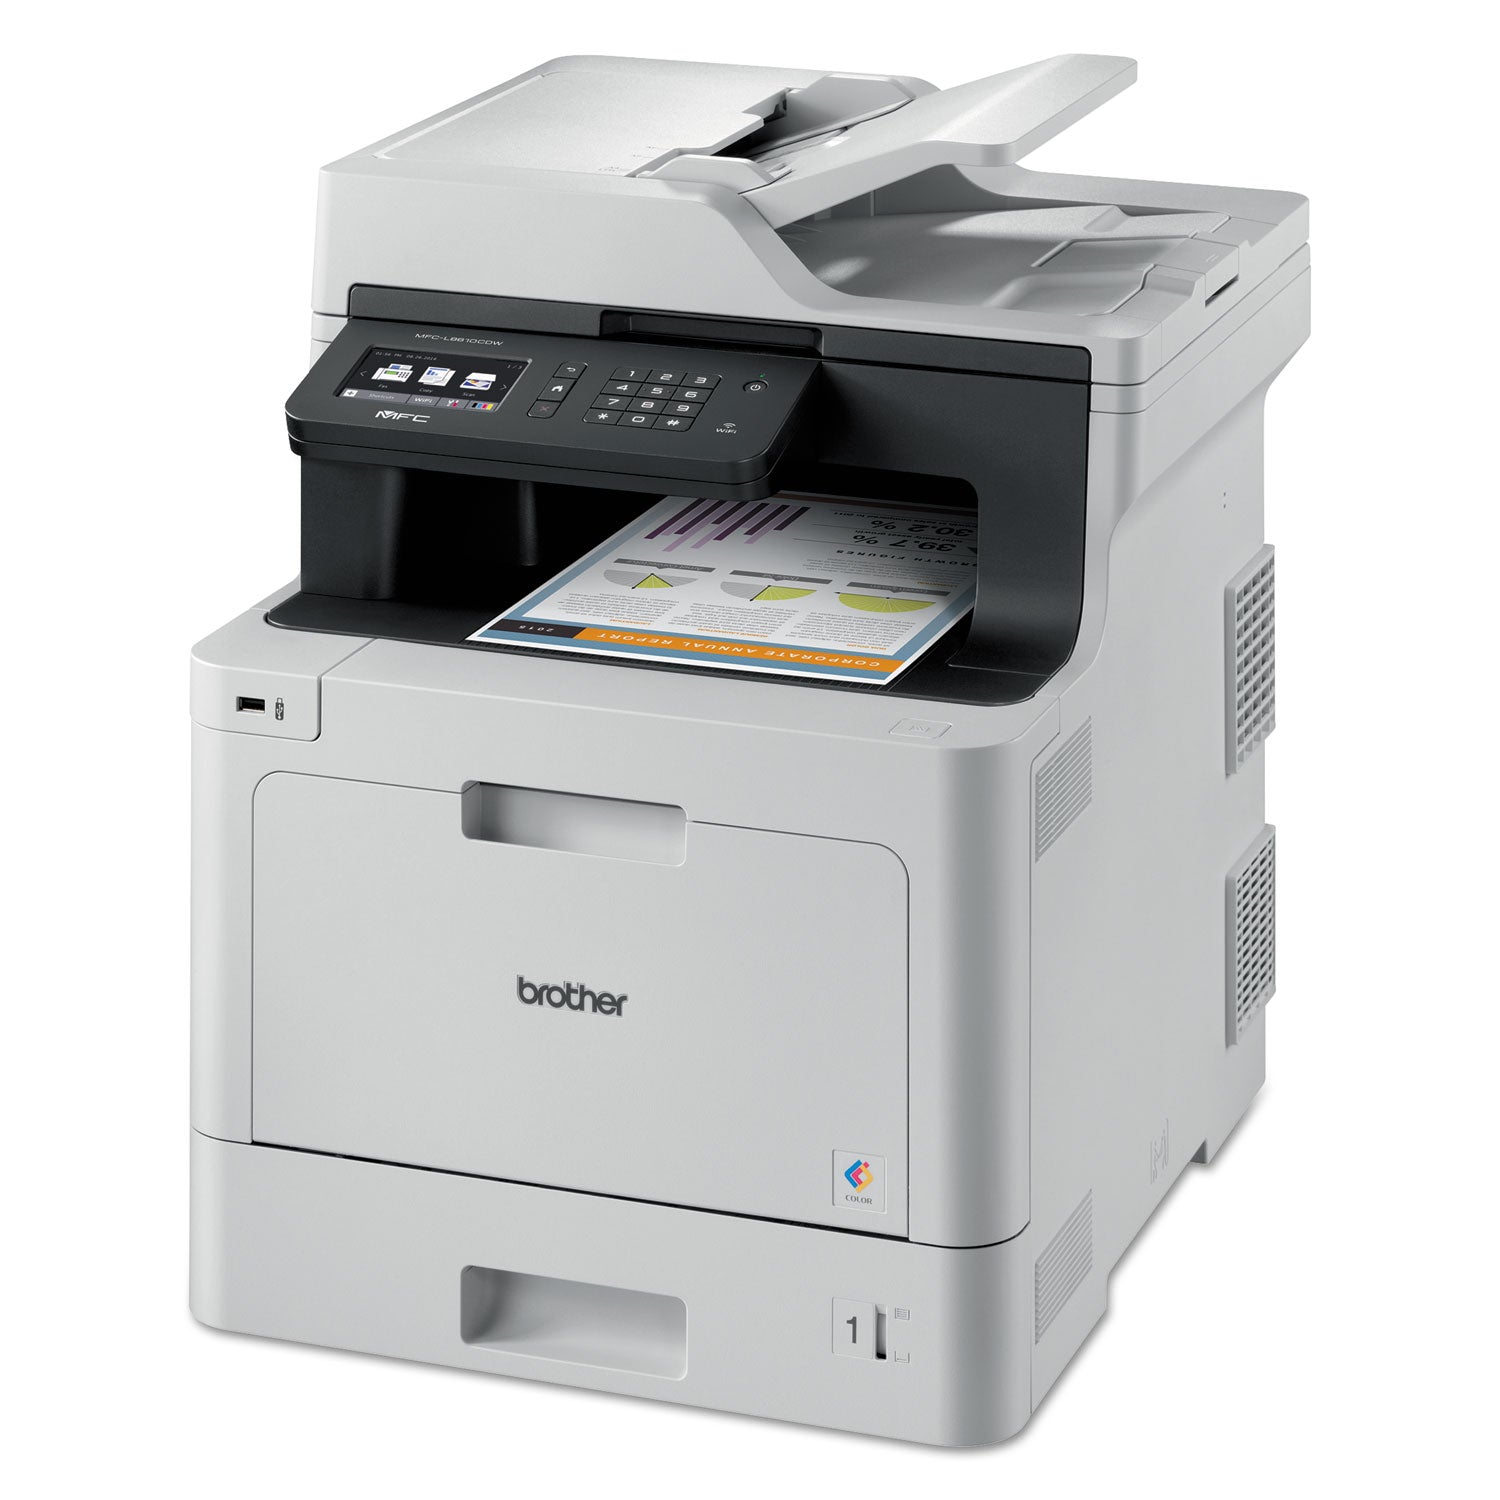 mfcl8610cdw-business-color-laser-all-in-one-printer-with-duplex-printing-and-wireless-networking_brtmfcl8610cdw - 2